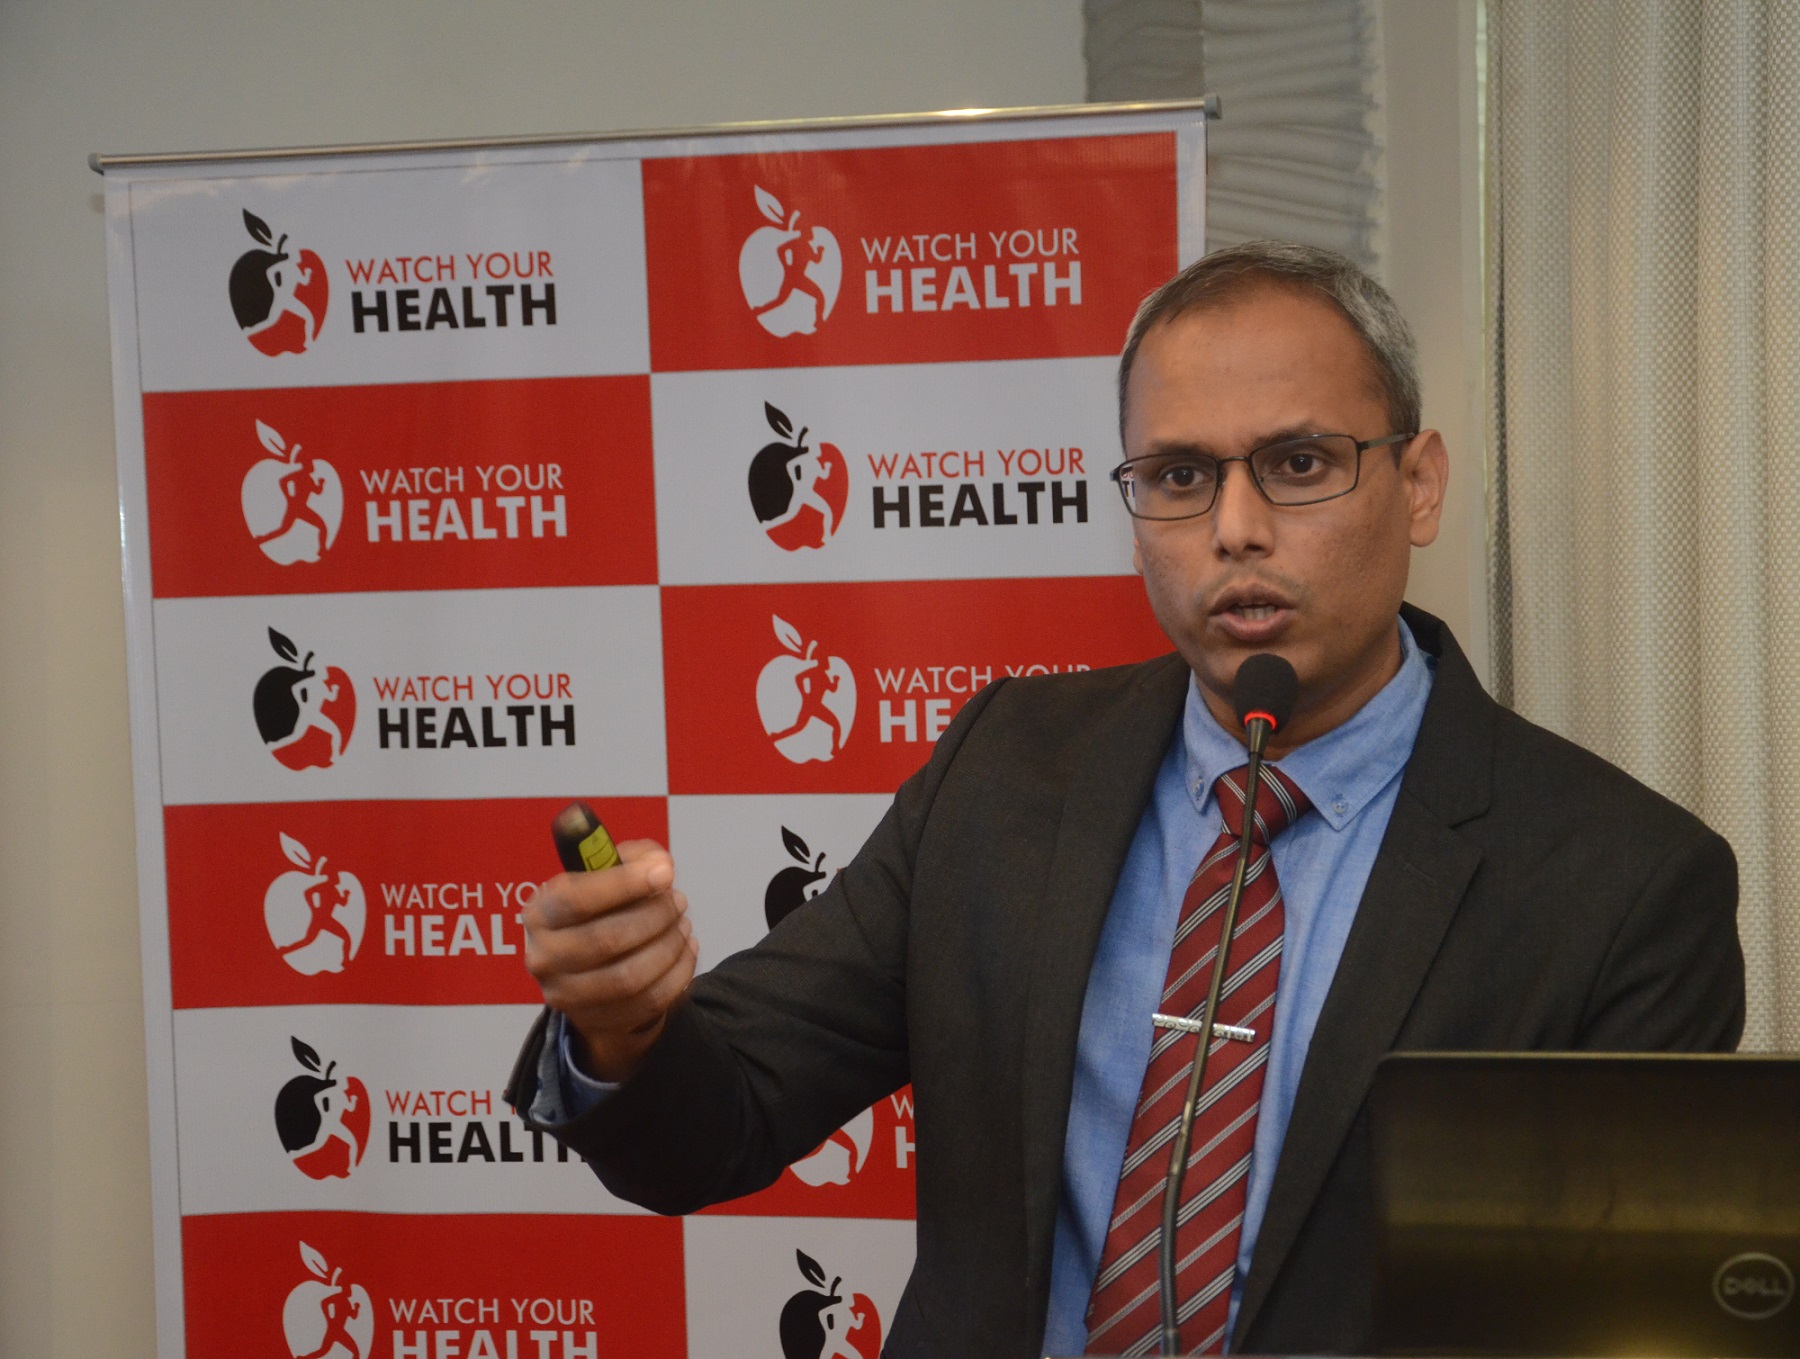 Mr. Ratheesh Nair, Founder and CEO, Watch Your Health at a press conference speaking about lifestyle management services to improve health and well-being of insurance policyholders / (GPN) 